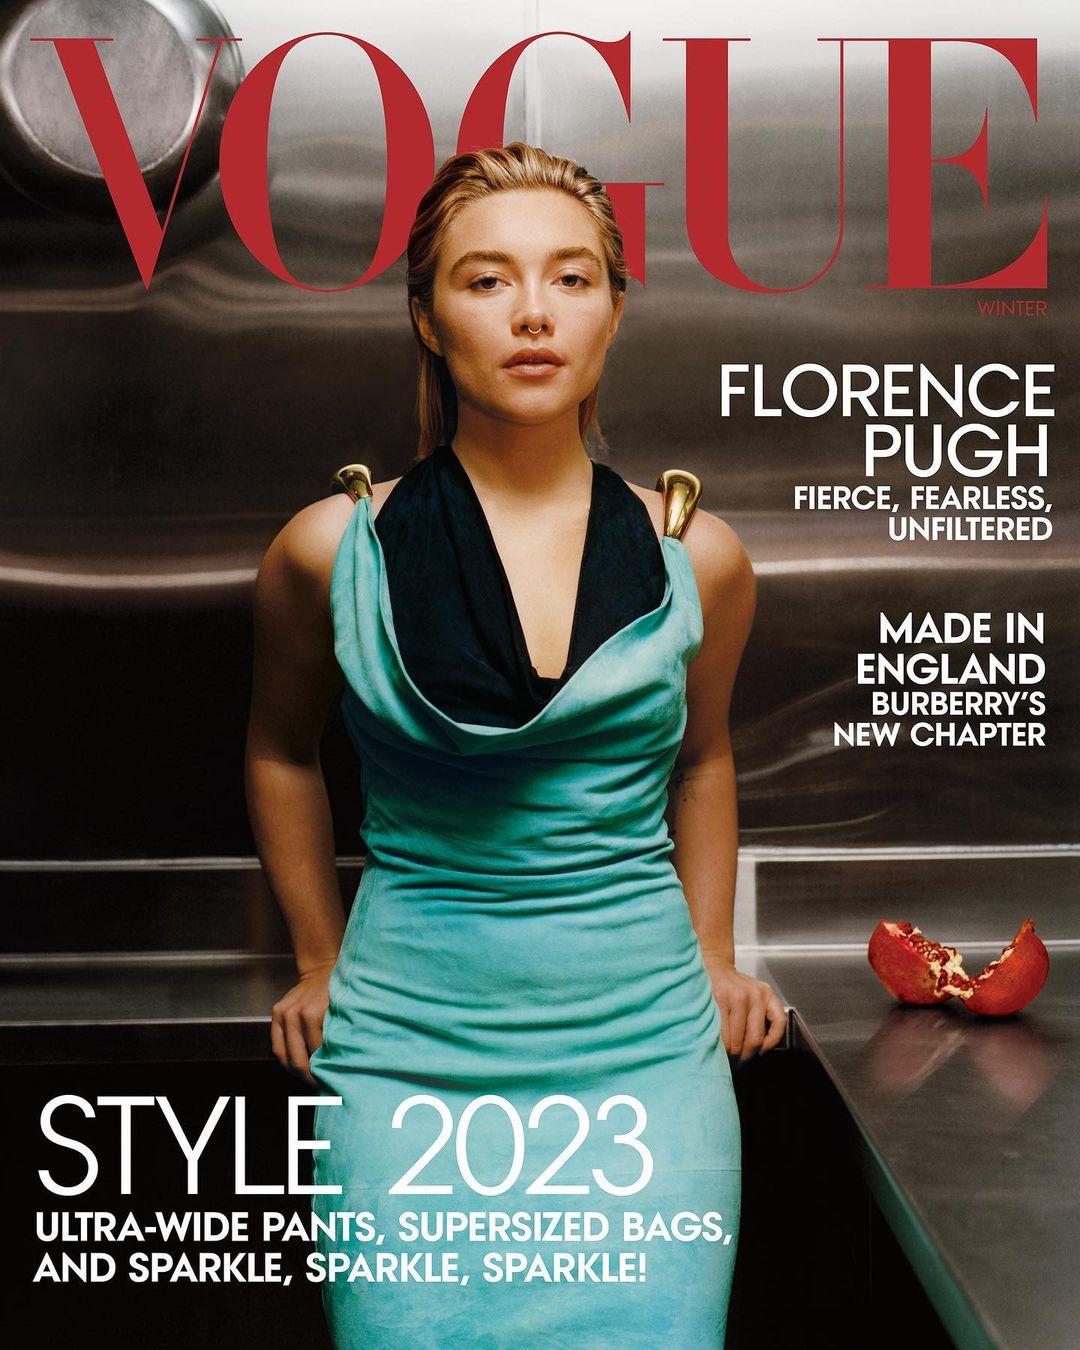 Florence Pugh Serve Up Martinis To 'Vogue' Staff While Discussing Shaving Her Head On Camera